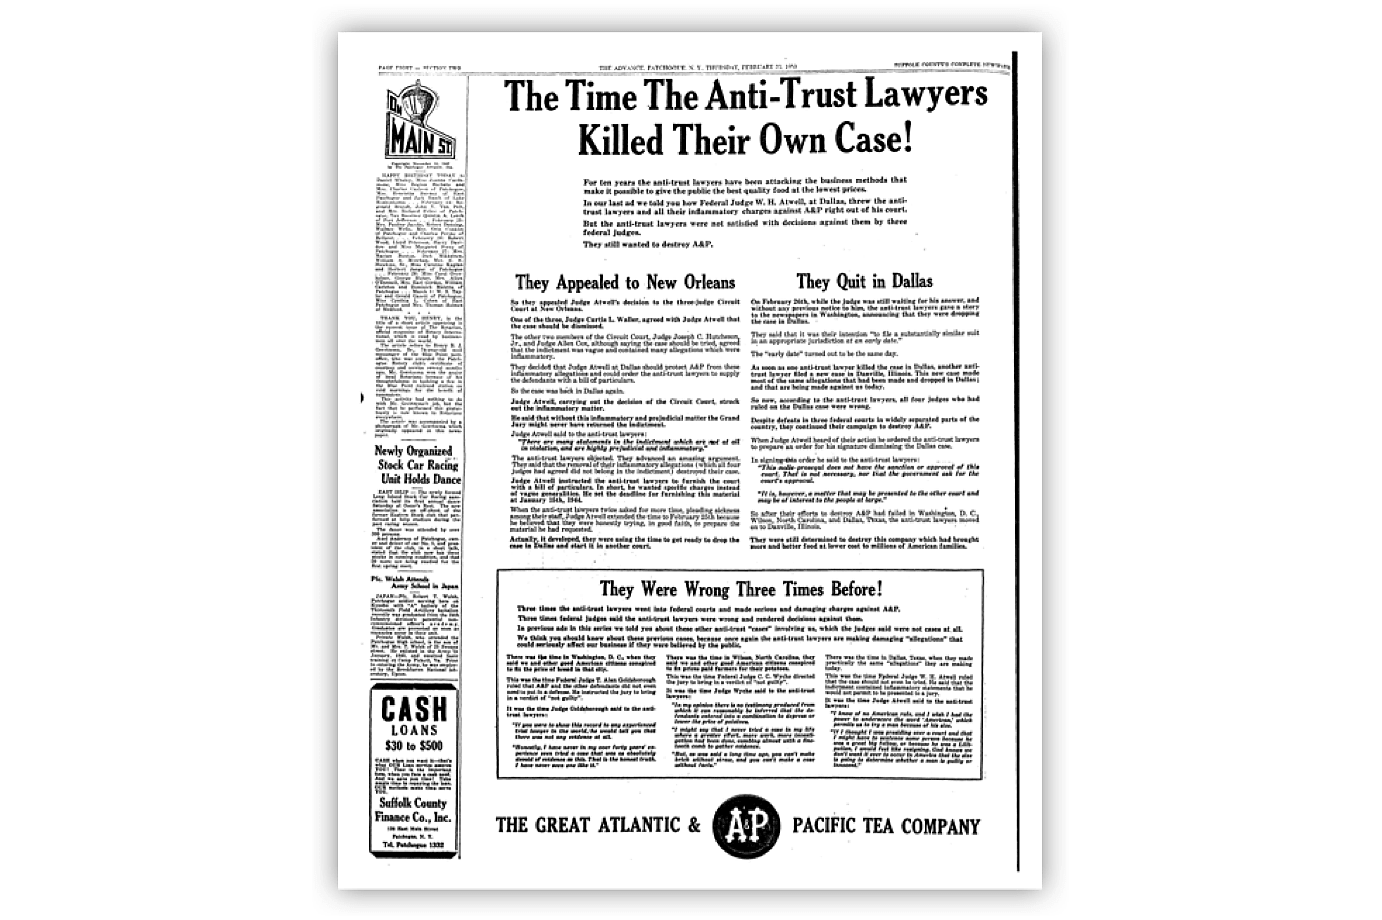 "The Time The Anti-Trust Lawyers Killed Their Own Case" A&P Newspaper Ad